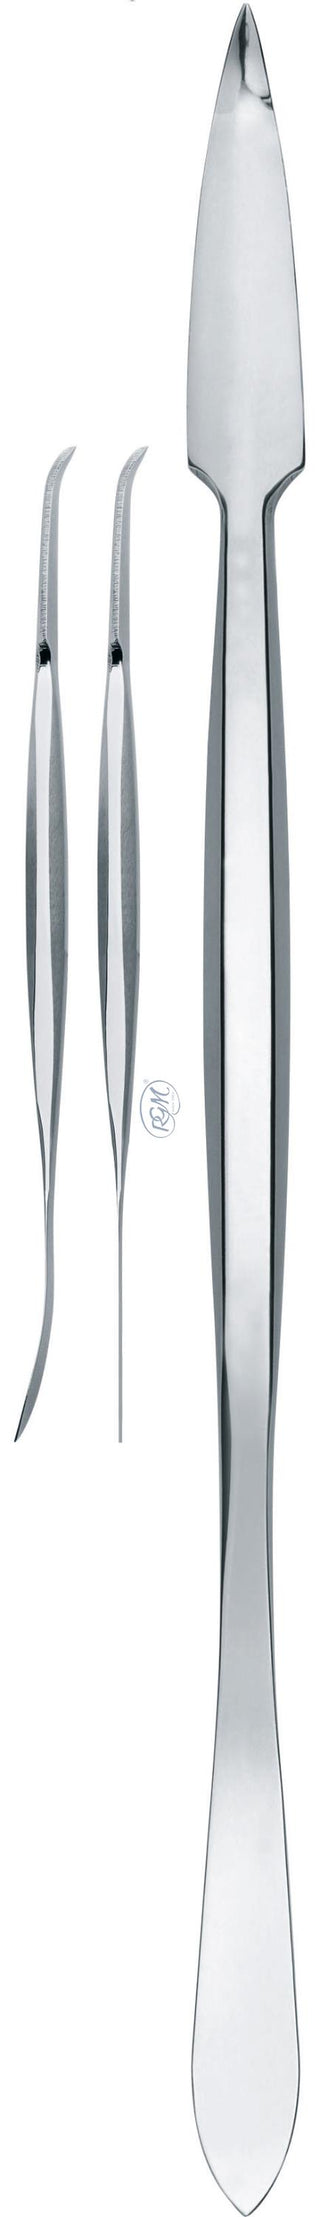 Stainless Steel Curved Spatulas